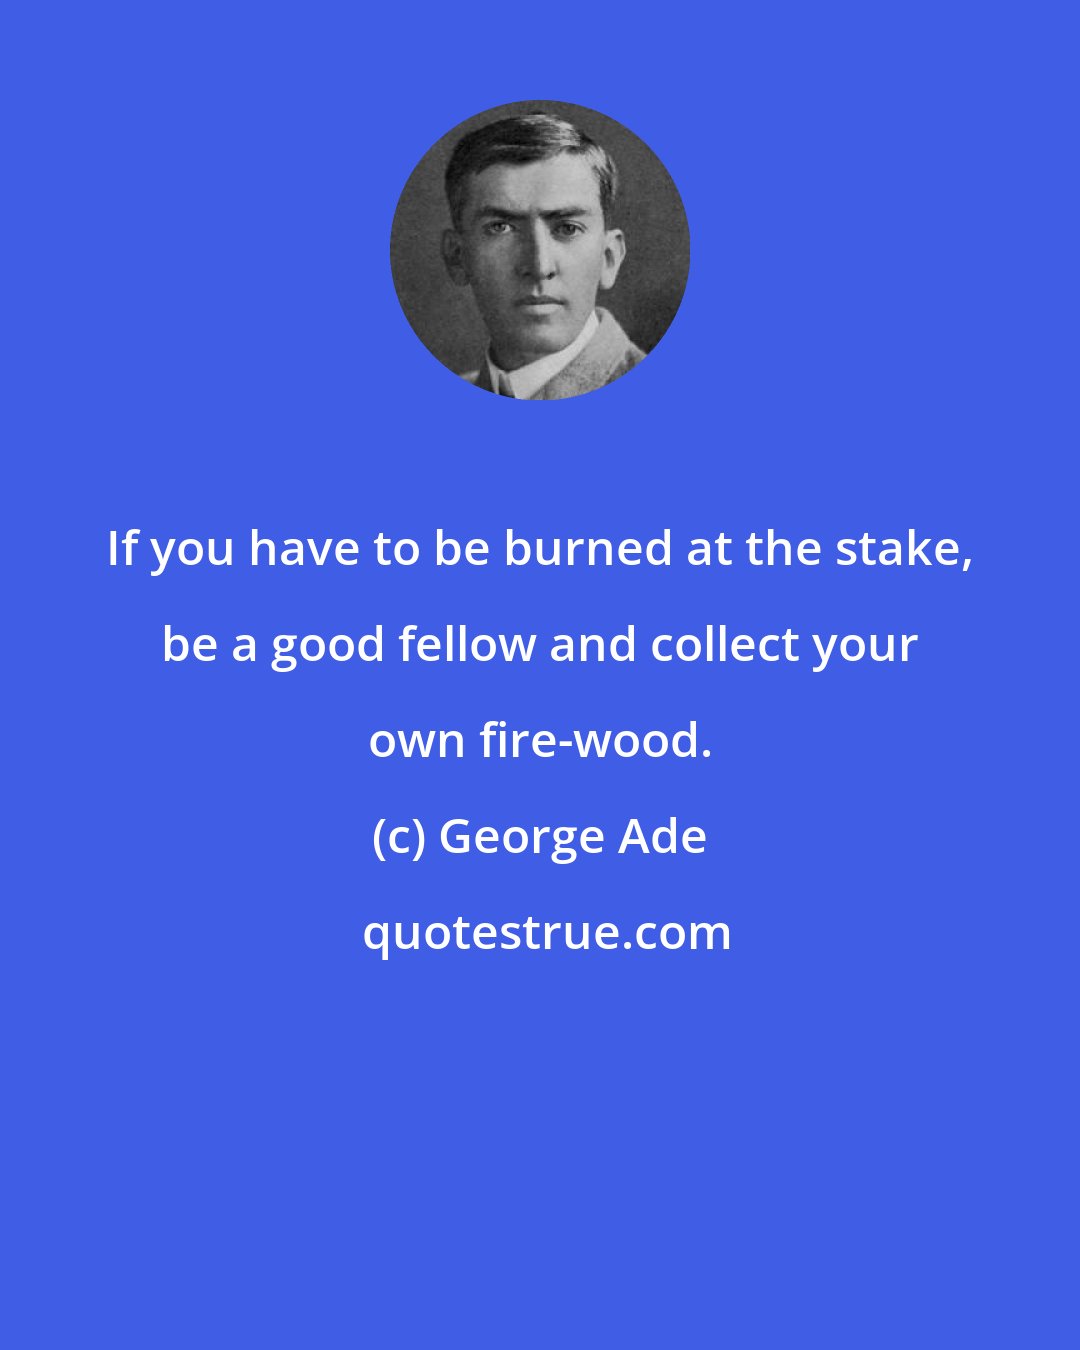 George Ade: If you have to be burned at the stake, be a good fellow and collect your own fire-wood.